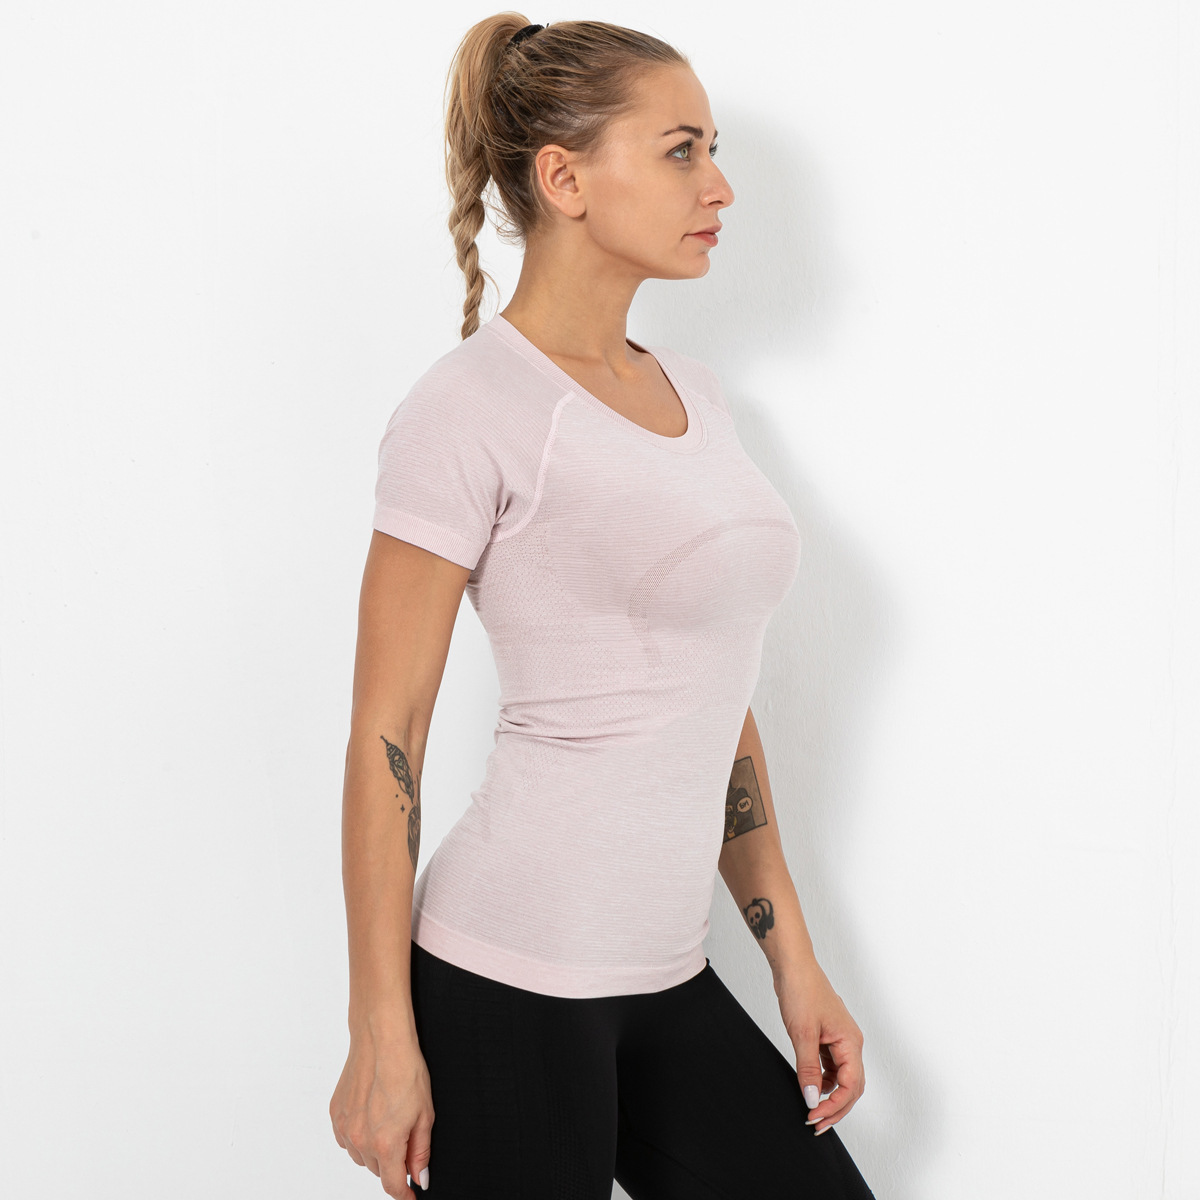 quick-drying short-sleeved sports tops   NSNS11017